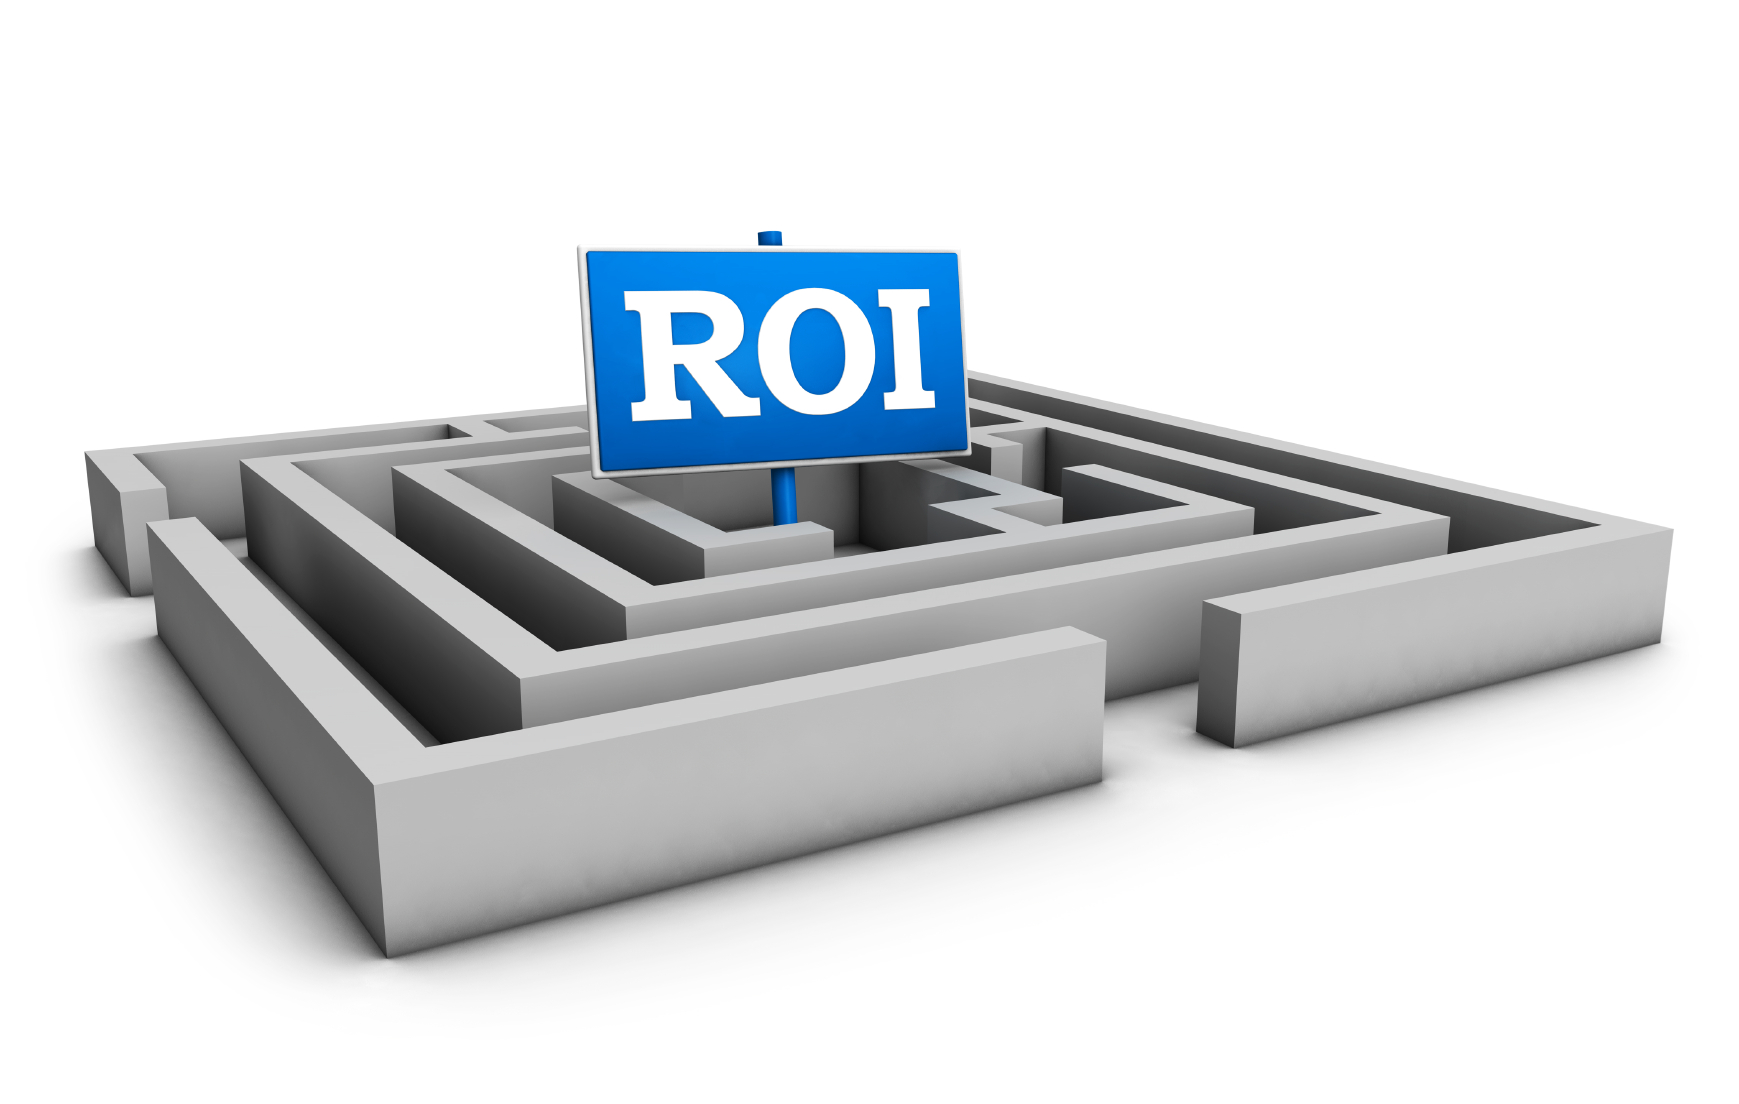 Return on investment business concept with labyrinth and blue roi word on white background.